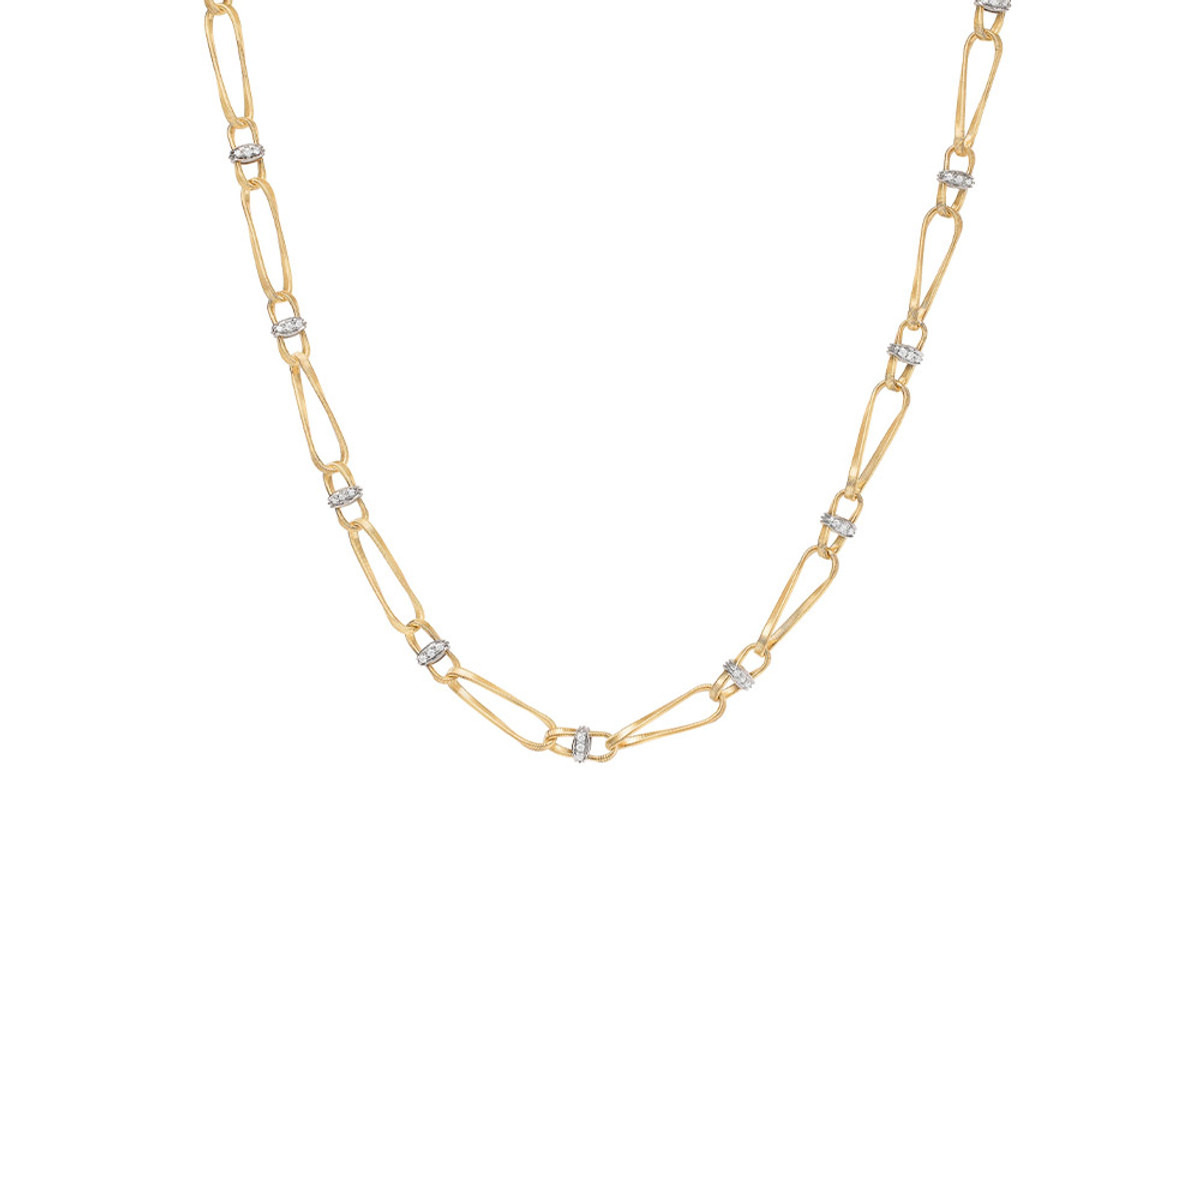 Marco Bicego Marrakech Collection 18K Yellow Gold Onde Diamond Hand Twisted Link Necklace-54255 Product Image